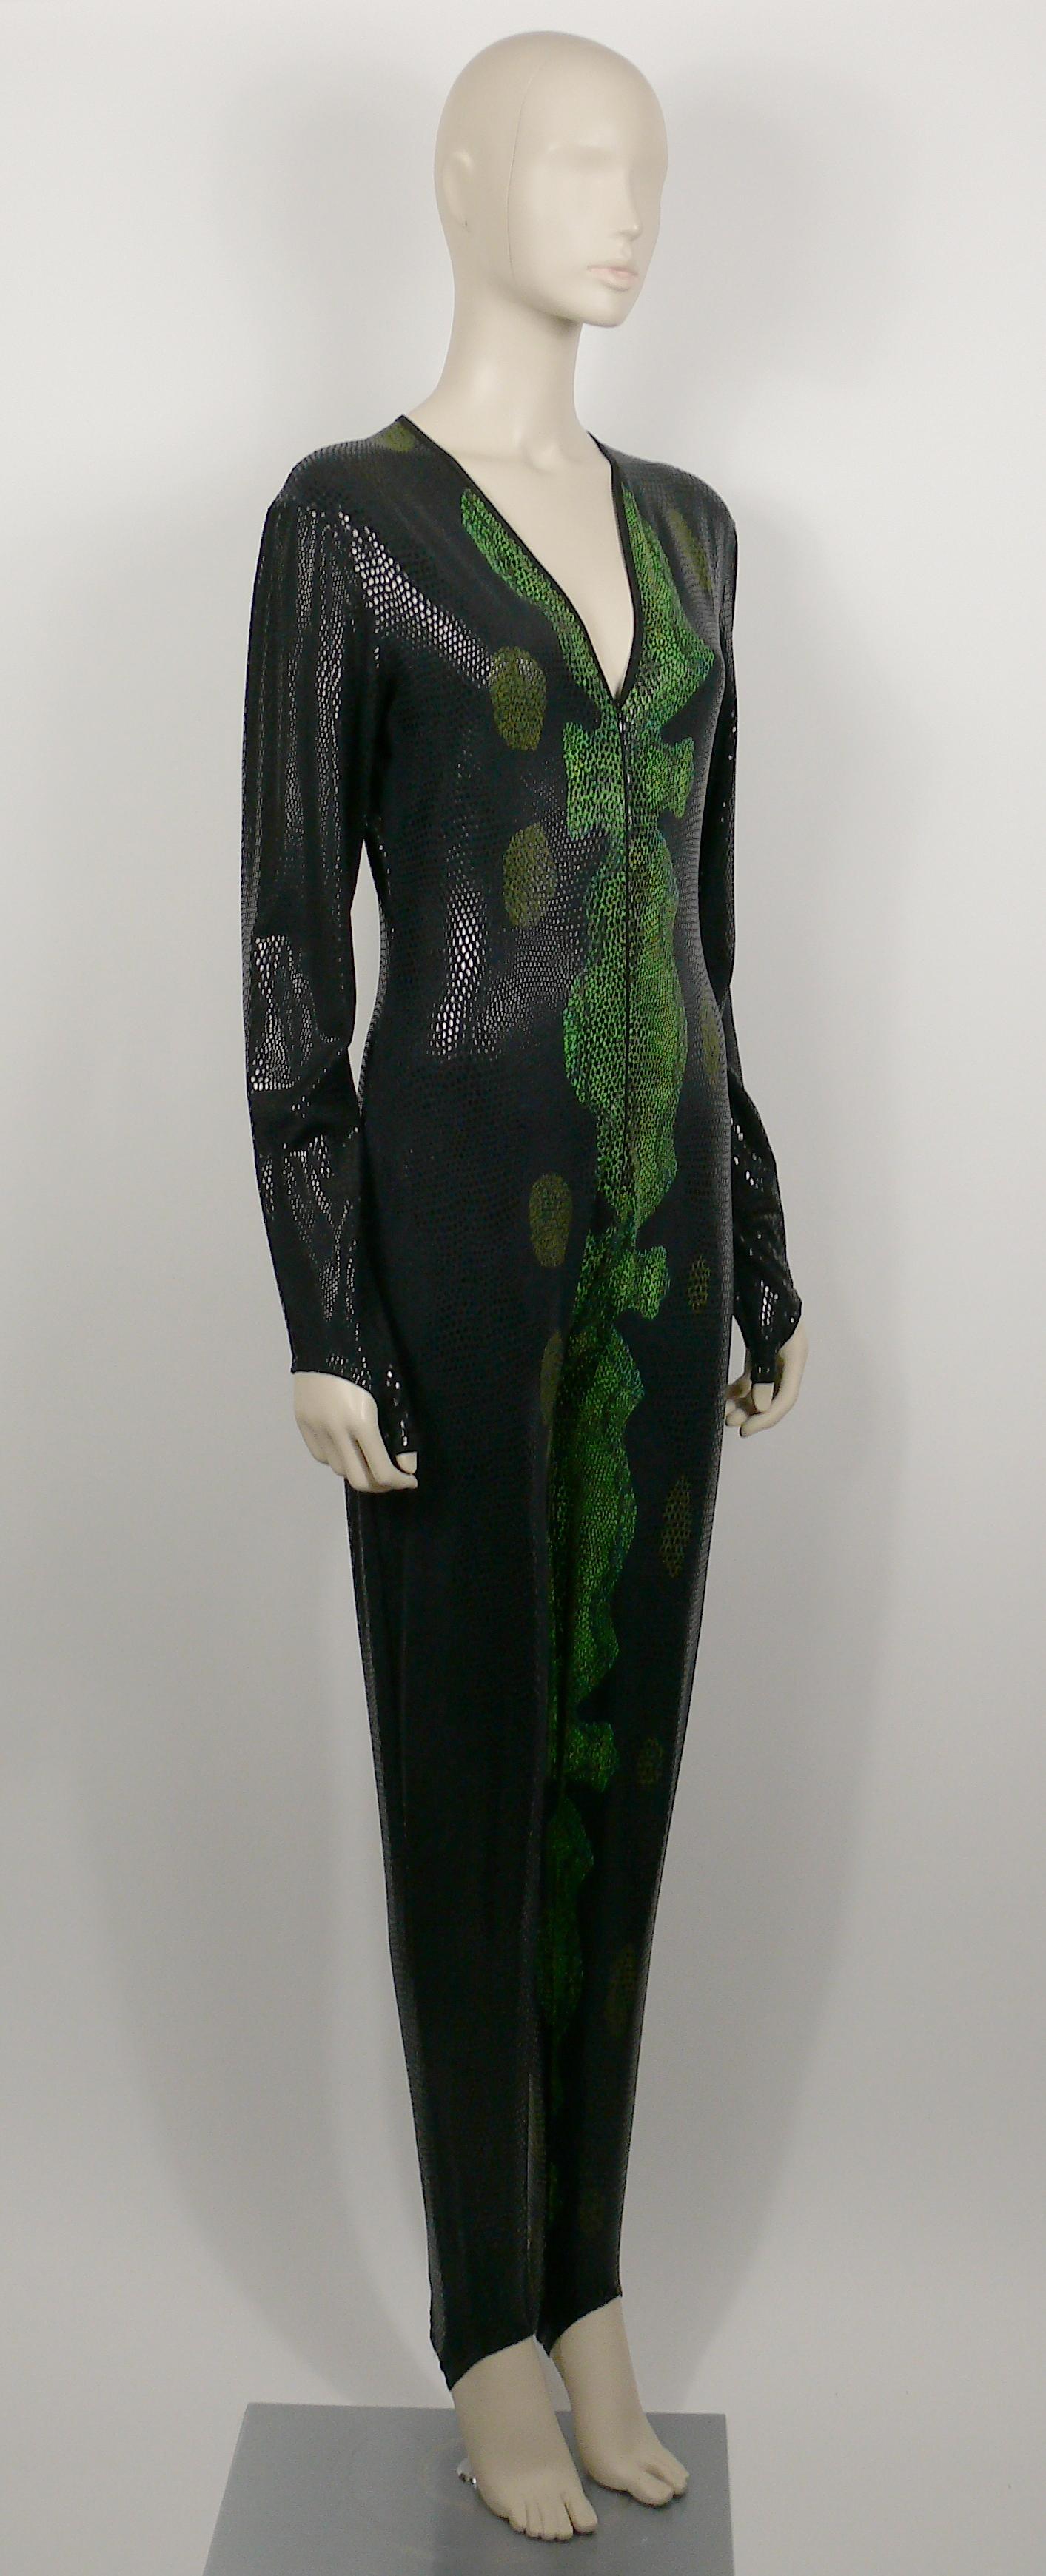 THIERRY MUGLER vintage black and green reptile skin jumpsuit.

A very rare find from the 1998 Autumn/Winter Collection.

This overall features :
- Stretch fabric printed in spectacular glittering black and green reptile skin pattern. 
- Deep v-neck